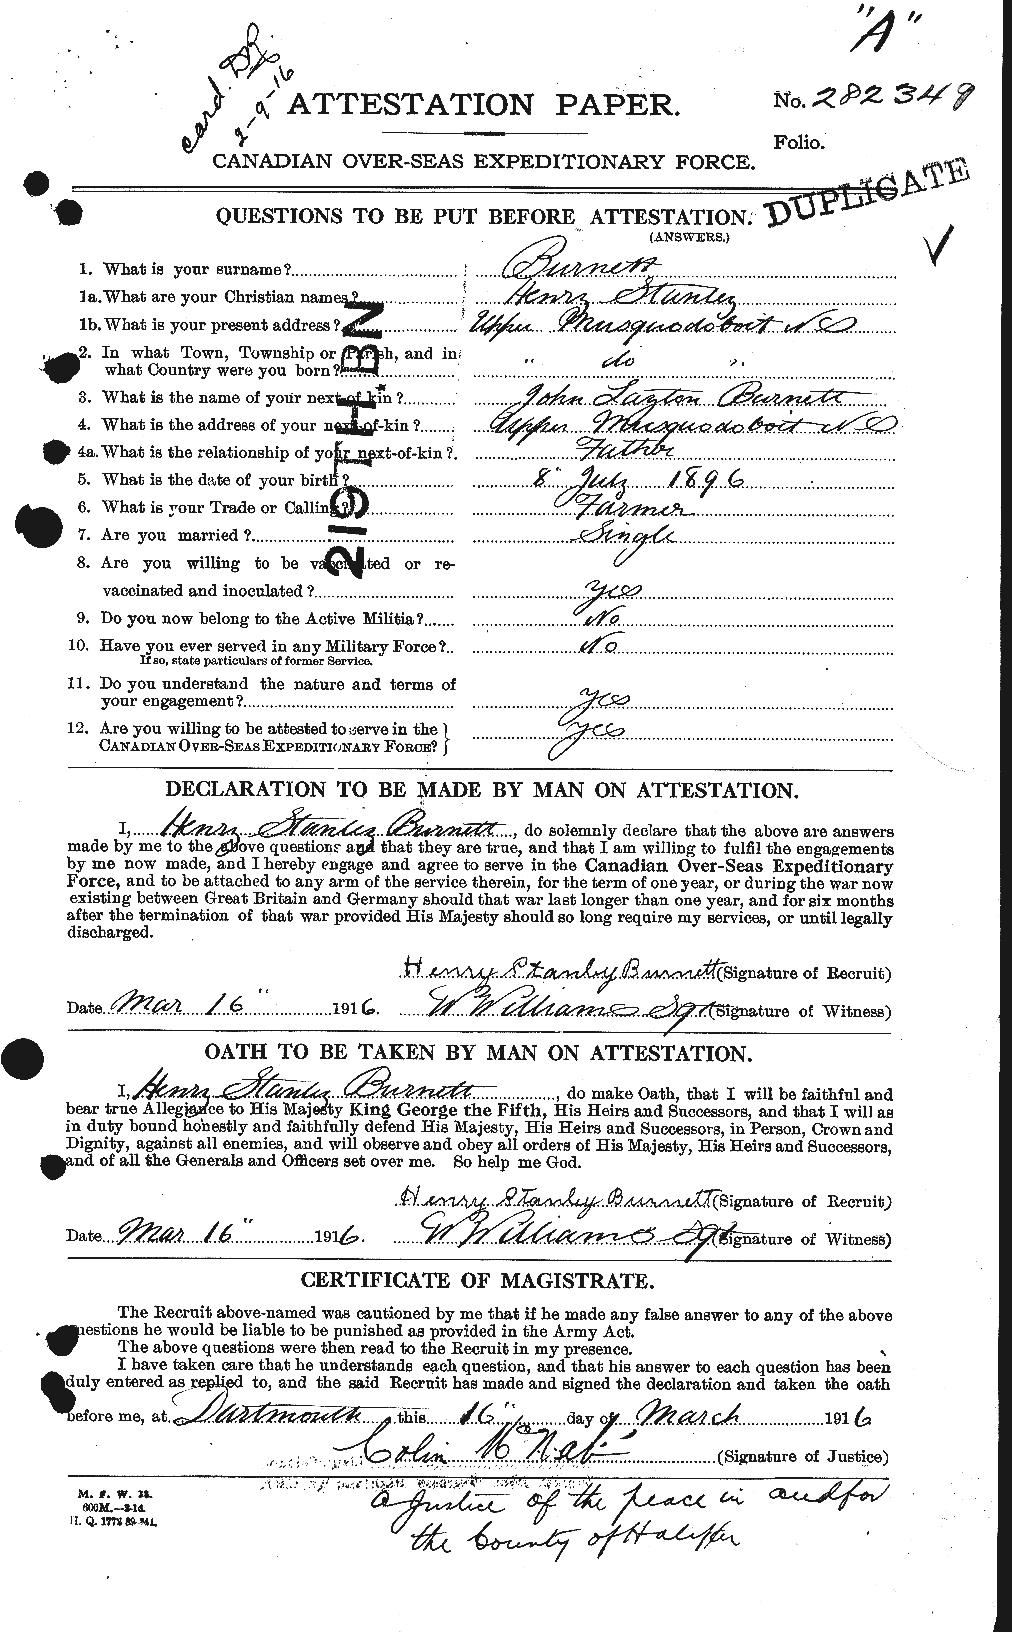 Personnel Records of the First World War - CEF 272108a